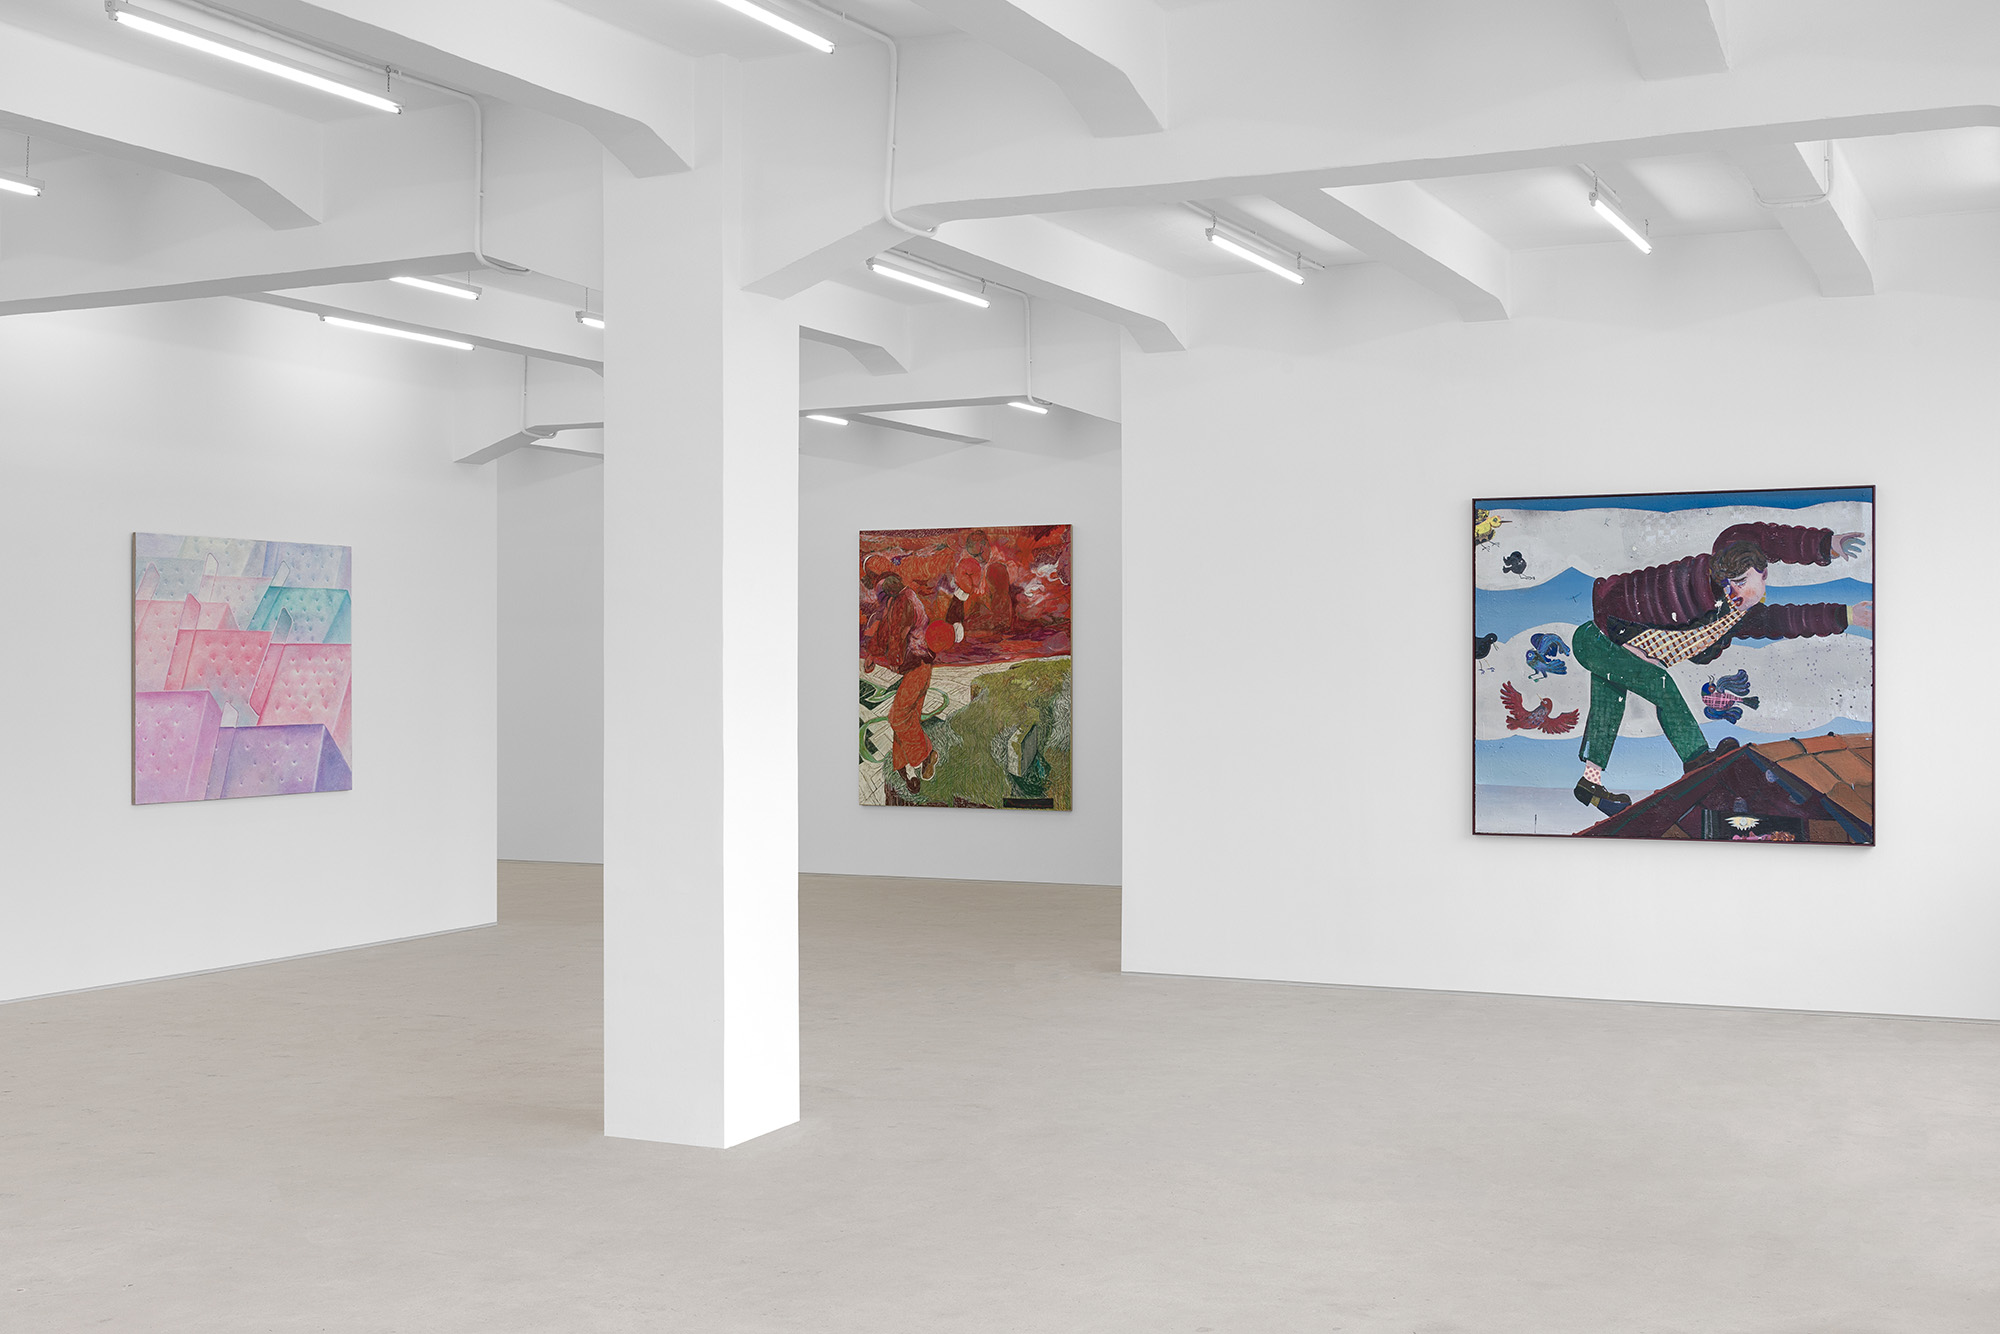 Installation view of group exhibition, Vacation II, at Gallery Vacancy, featuring works by Henry Curchod, Pieter Jennes, and Richard Burton.